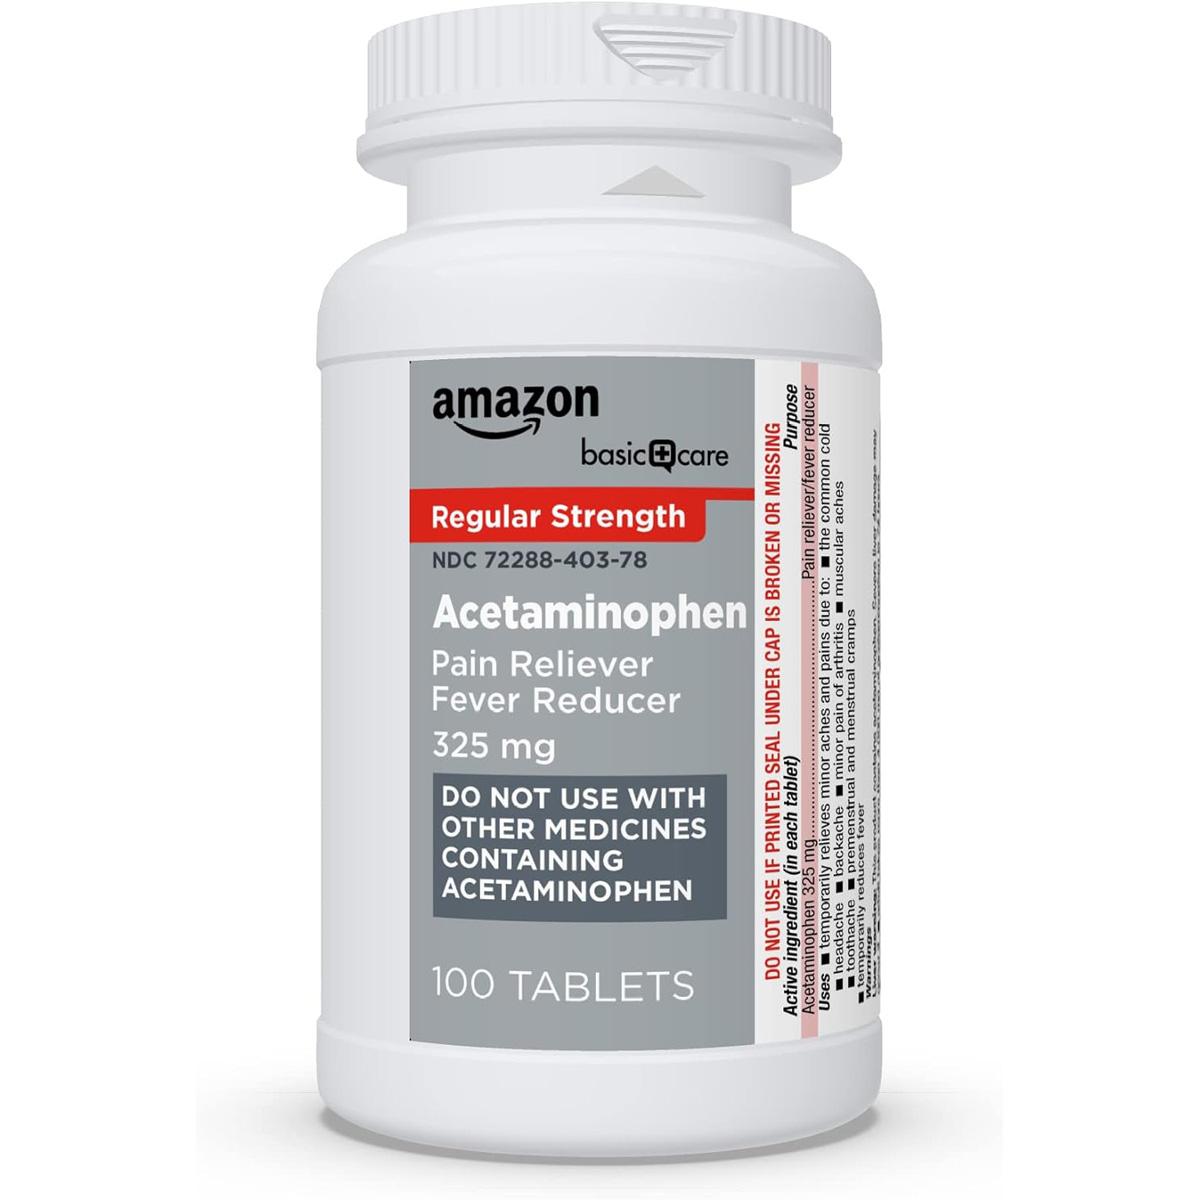 Amazon Basic Care 325mg Acetaminophen Pain Reliever Tablet 100 Pack for $1.91 Shipped